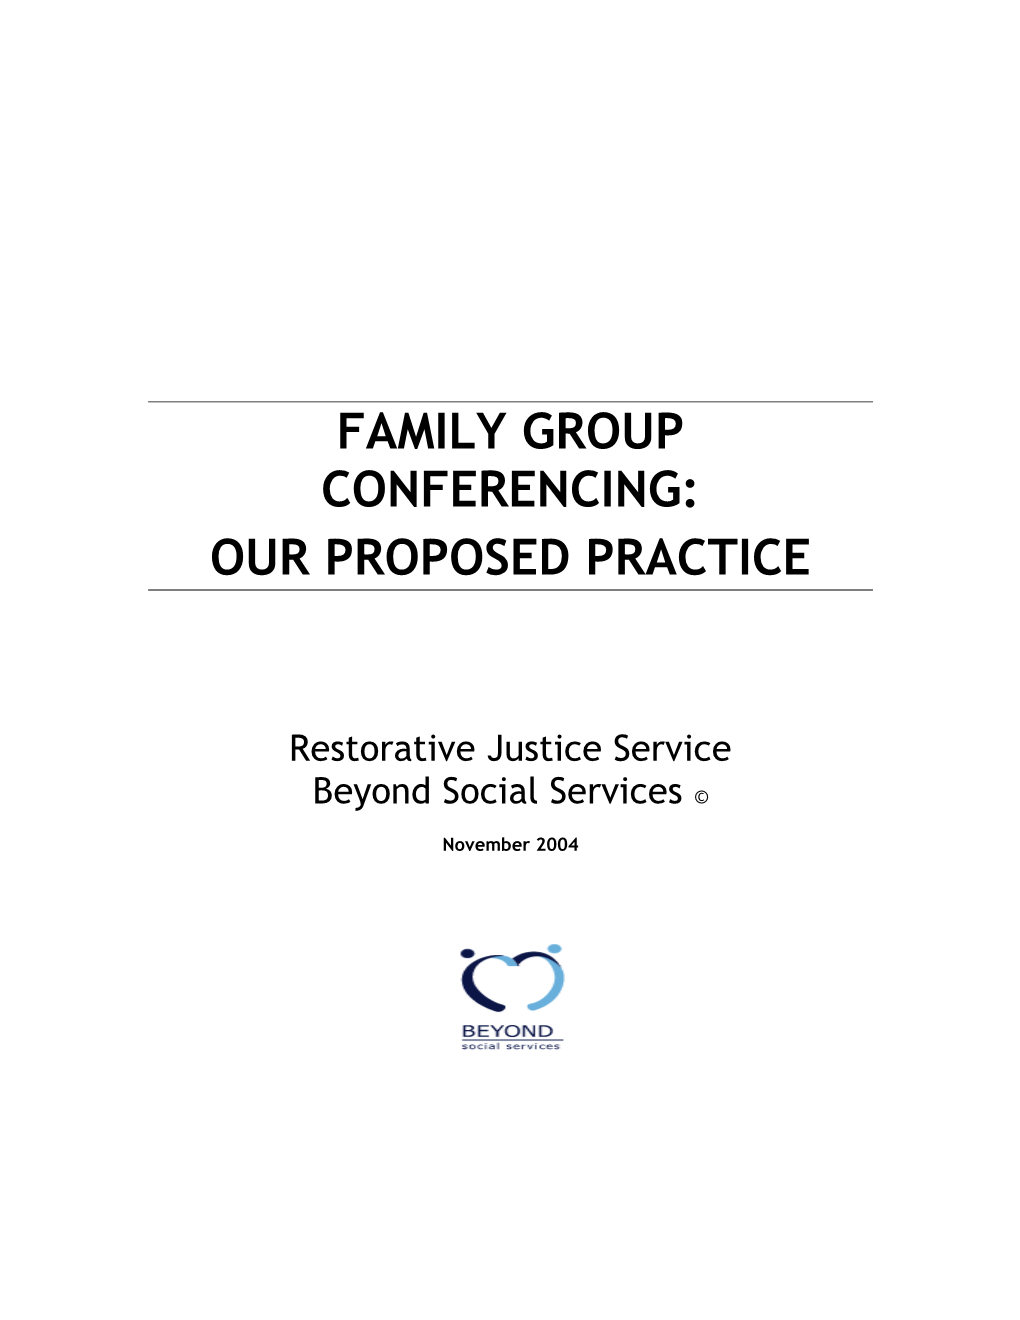 Family Group Conferencing: Our Proposed Practice